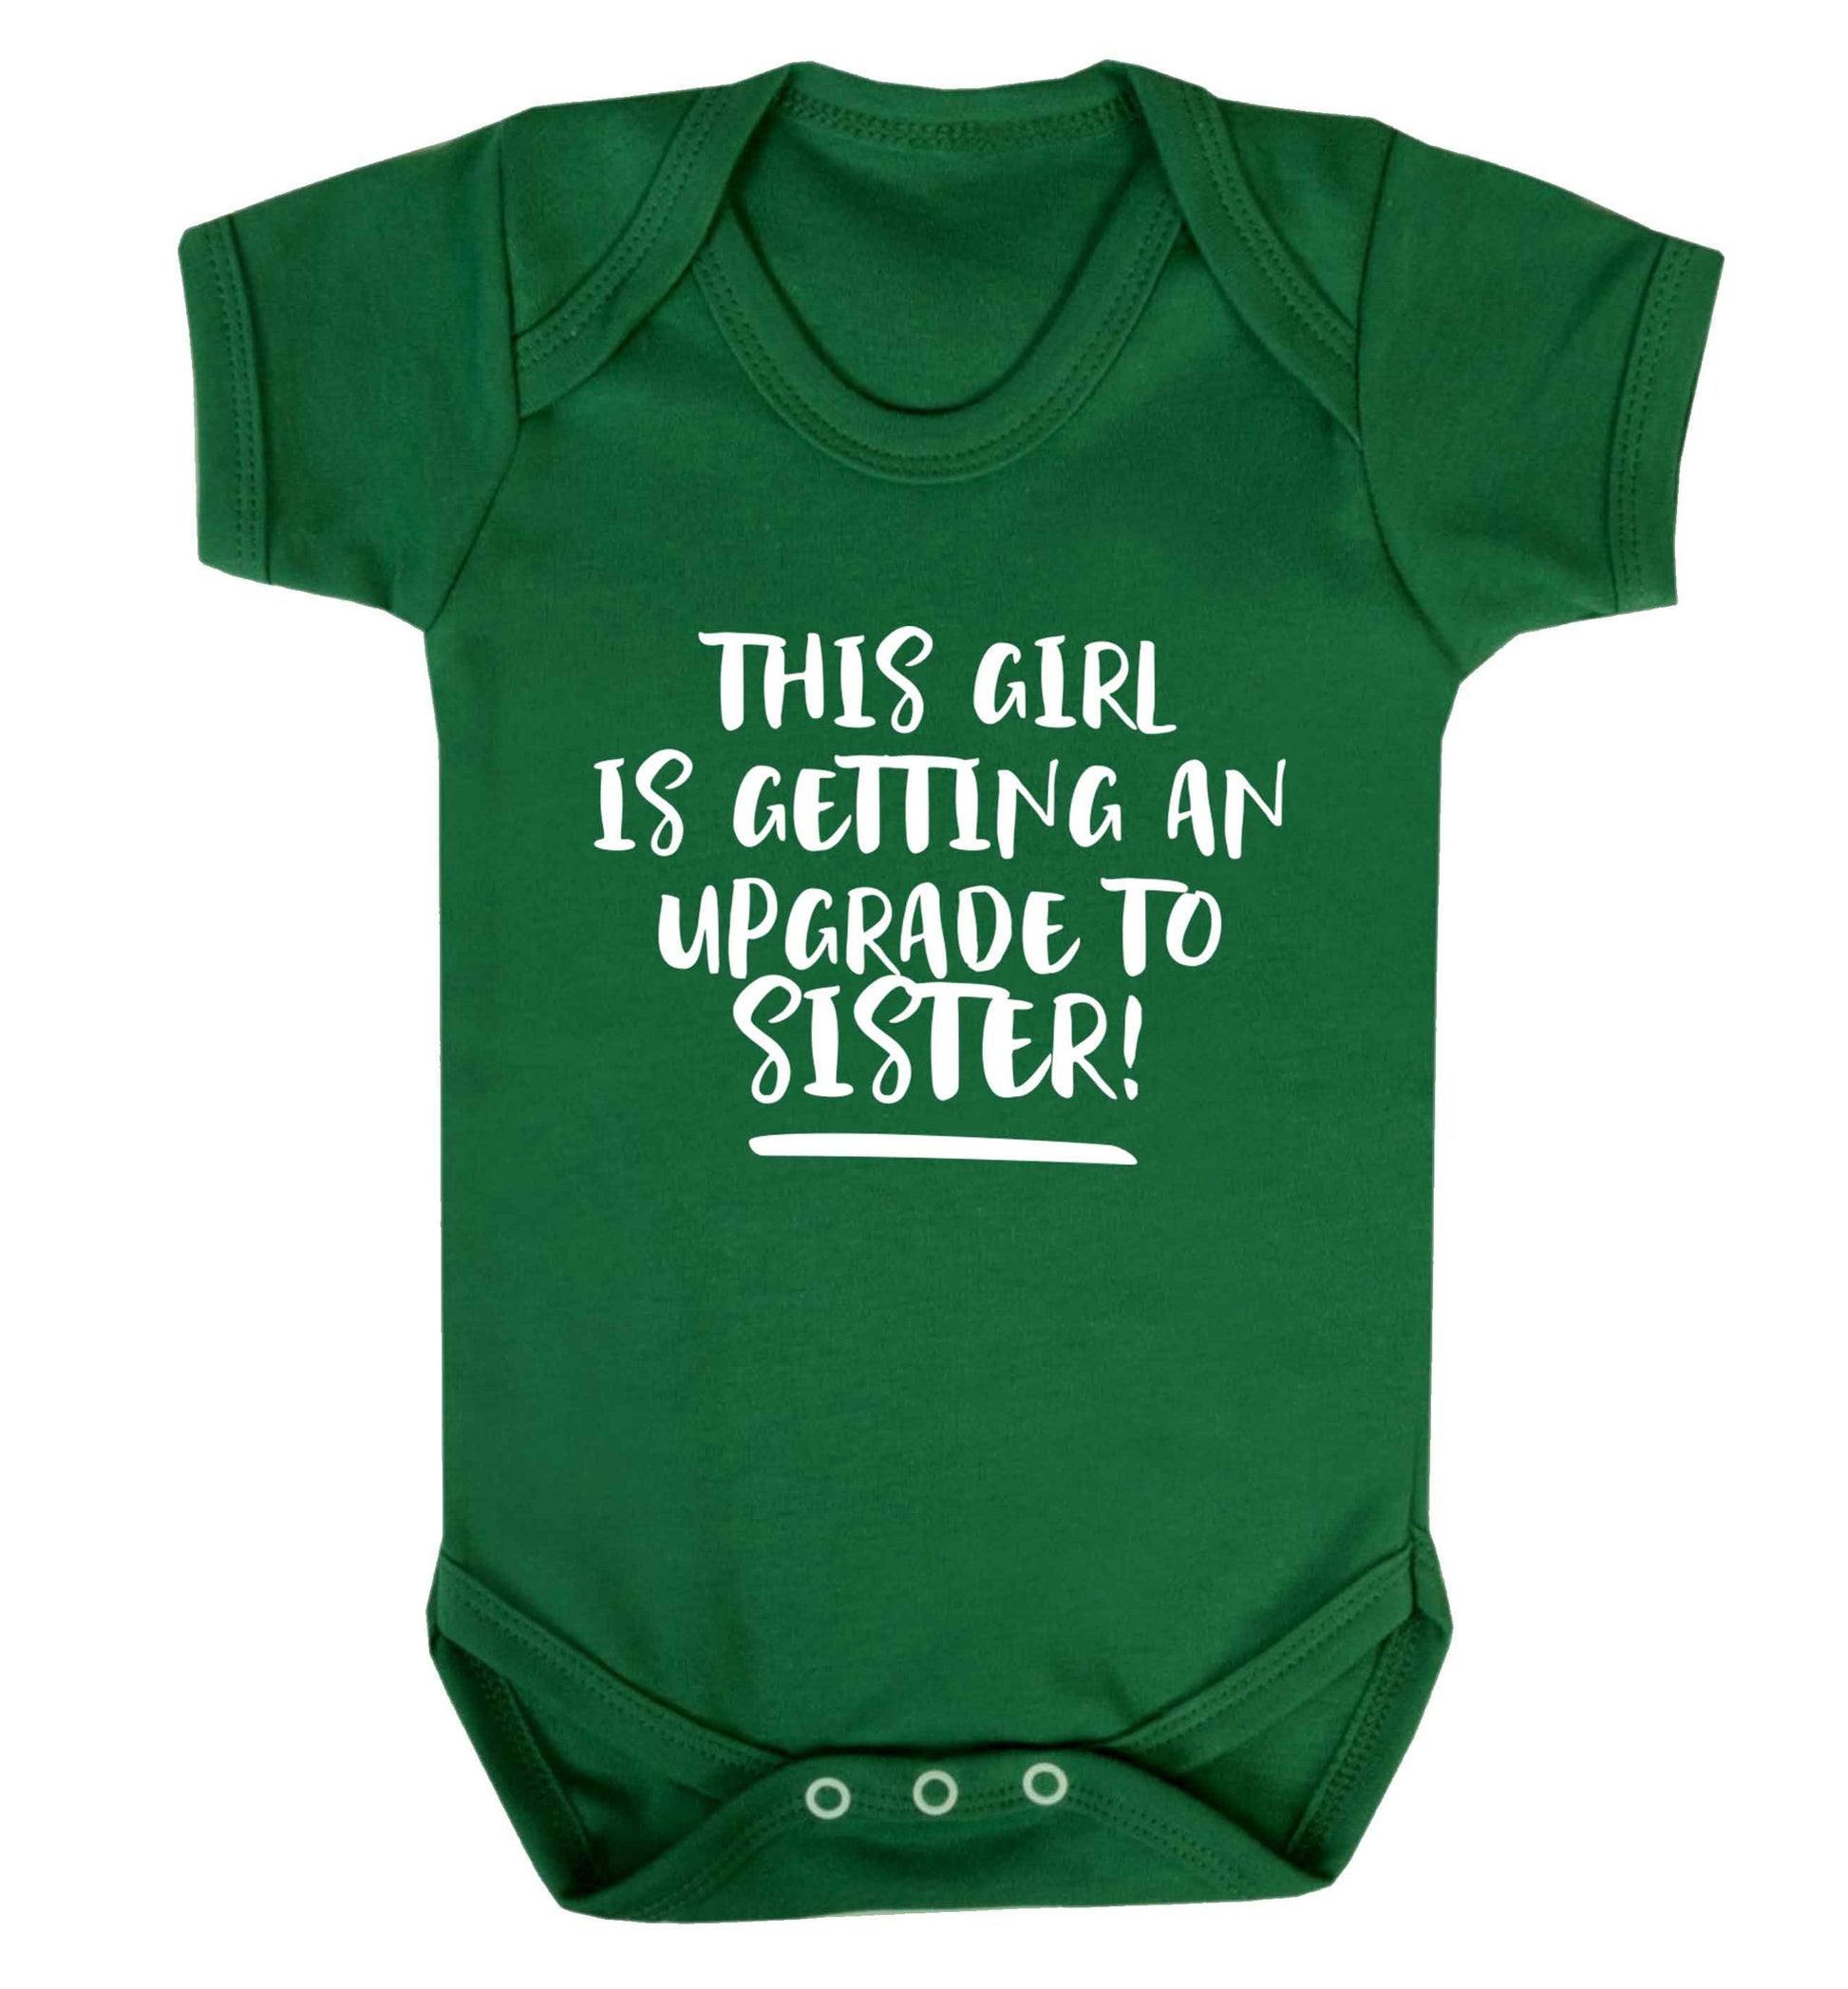 This girl is getting an upgrade to sister! Baby Vest green 18-24 months